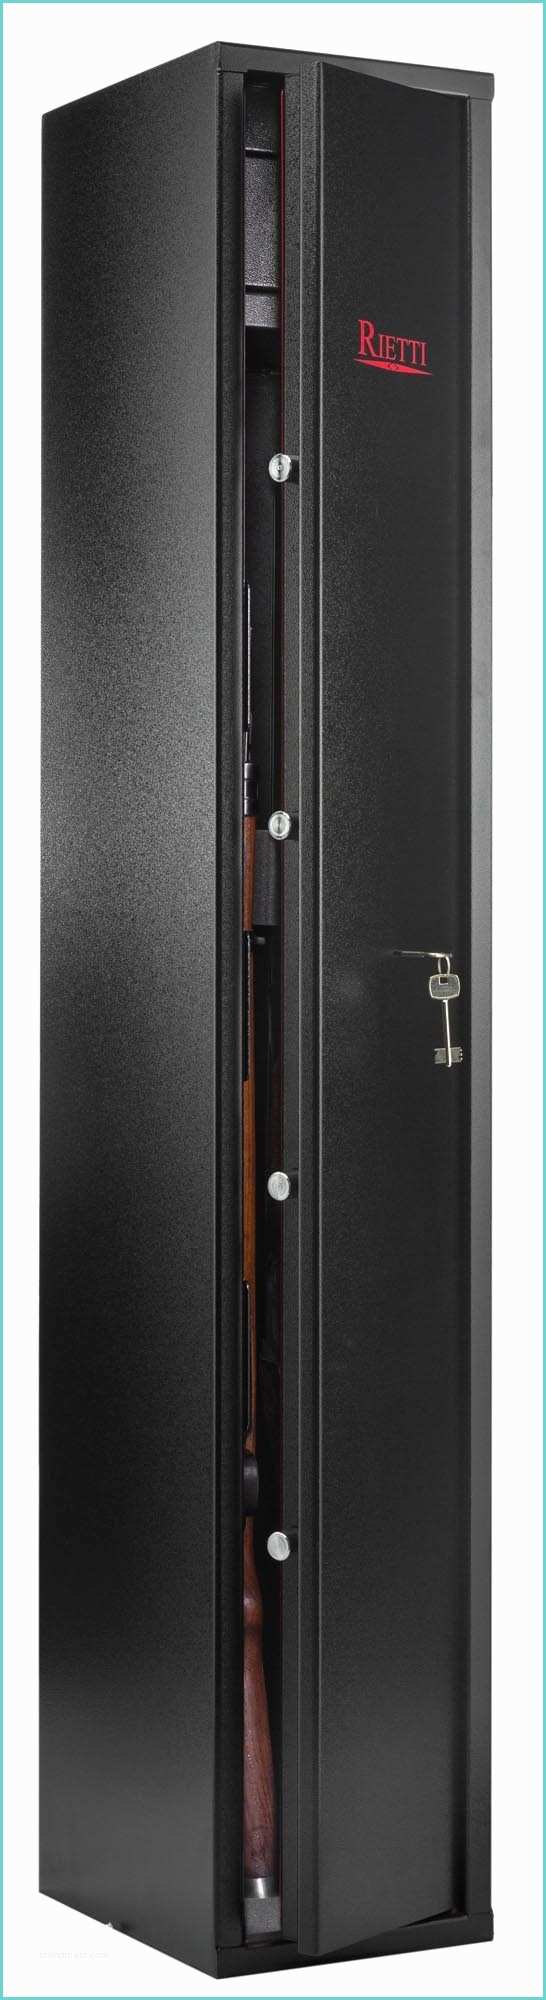 Armoire forte R S17 S Armoire forte Rietti First 5 Armes Armoires fortes